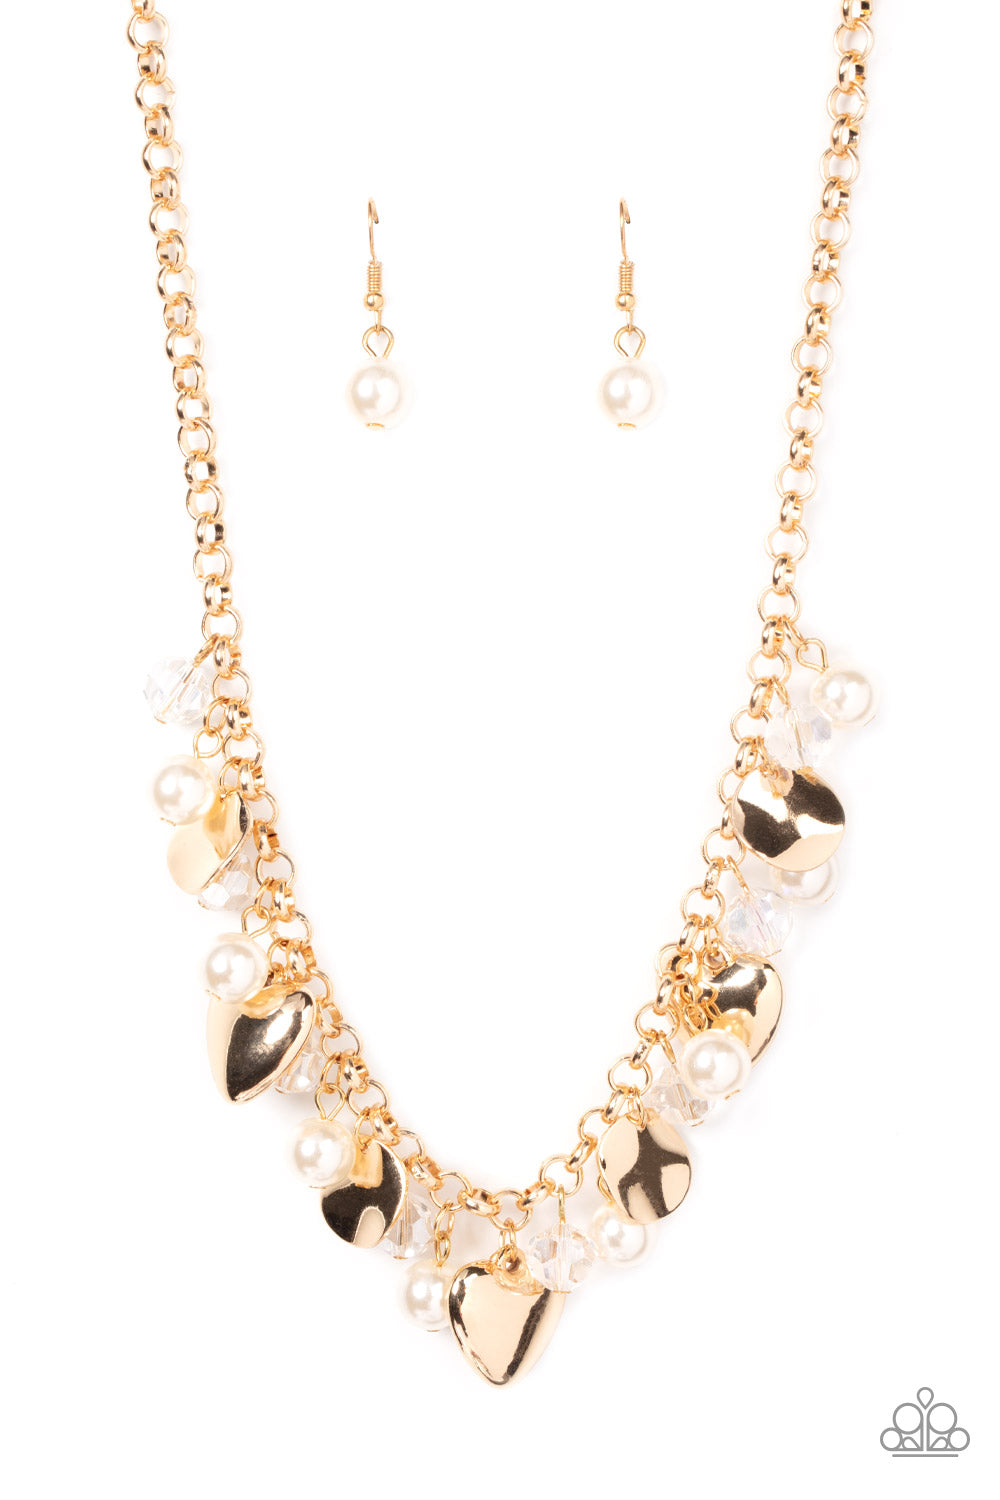 True Loves Trove Gold Necklace - Paparazzi Accessories  A flirtatious collection of white pearls, glassy white crystal-like beads, crinkled gold discs, and oversized locket inspired gold heart frames dance from a gold chain, resulting in a romantic fringe below the collar. Features an adjustable clasp closure.  Sold as one individual necklace. Includes one pair of matching earrings.